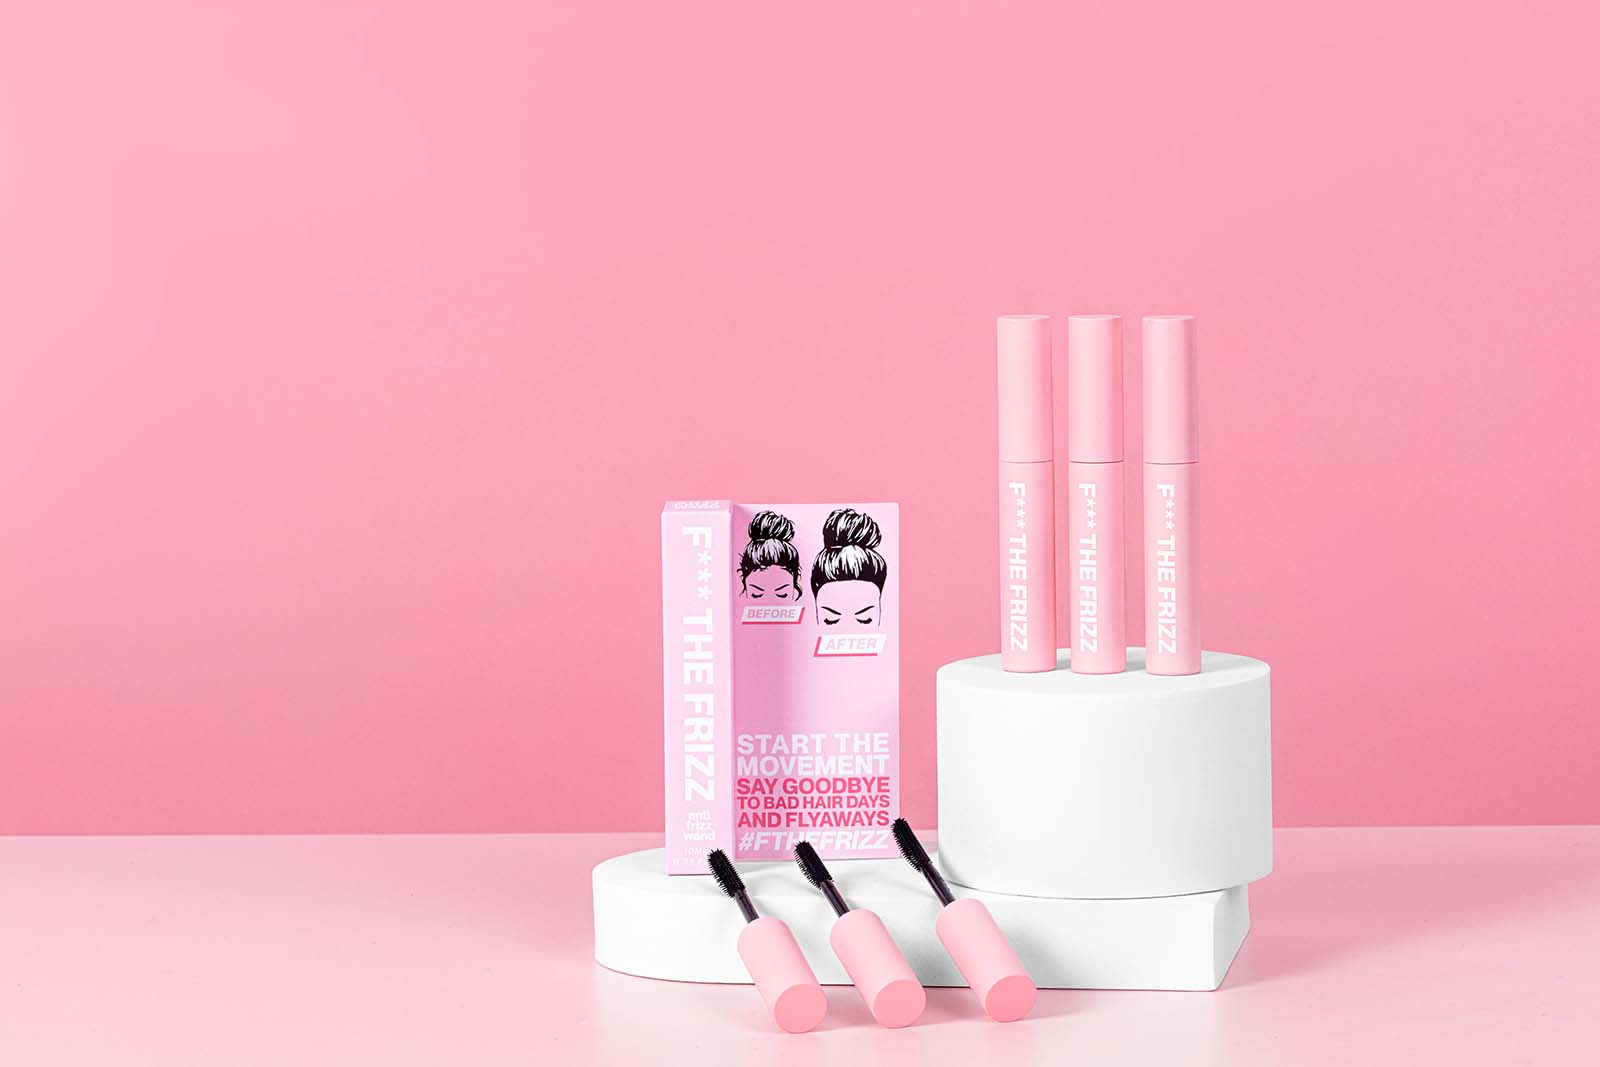 Bold Pink Product Photos for Anit Frizz Hair Wand. Styled content creation by Megzie Makes